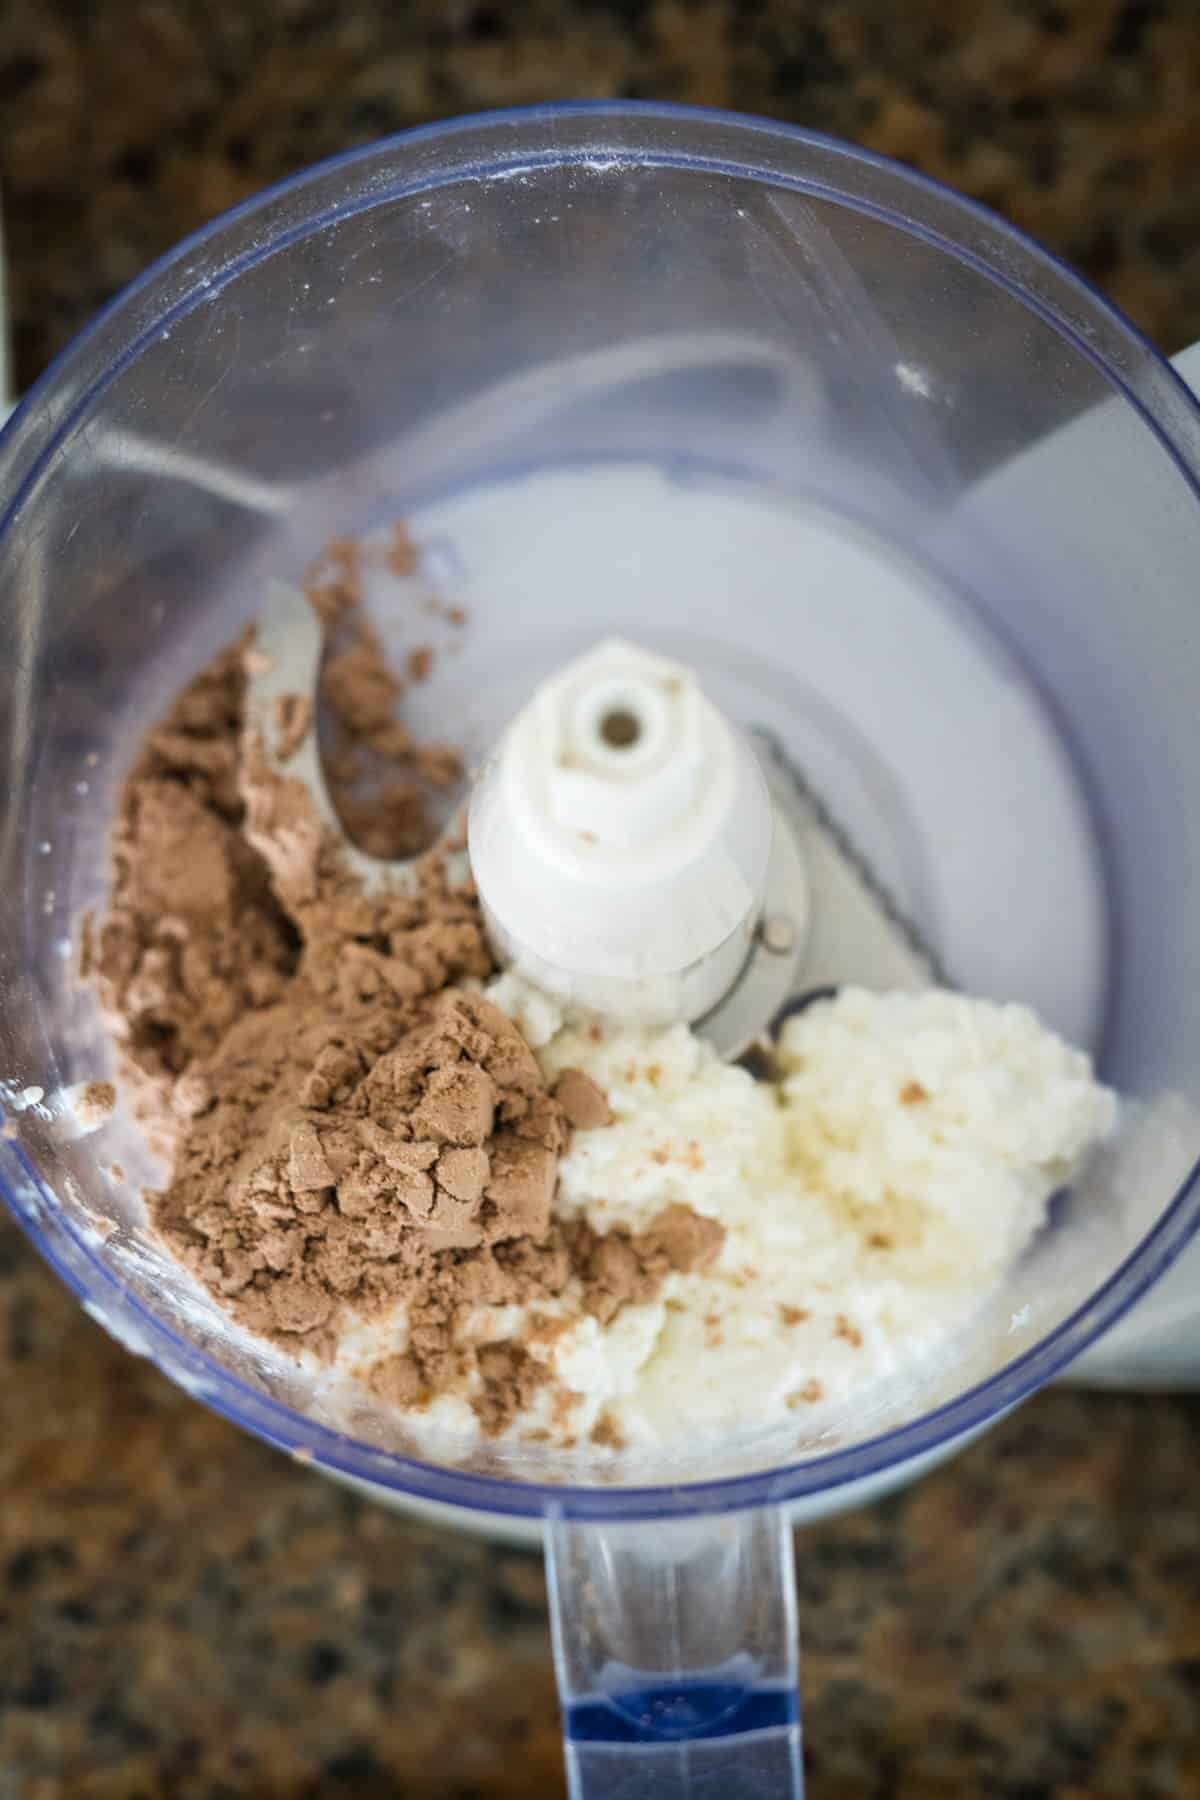 Top view of a blender containing chocolate protein powder and cottage cheese pudding, on a kitchen countertop.